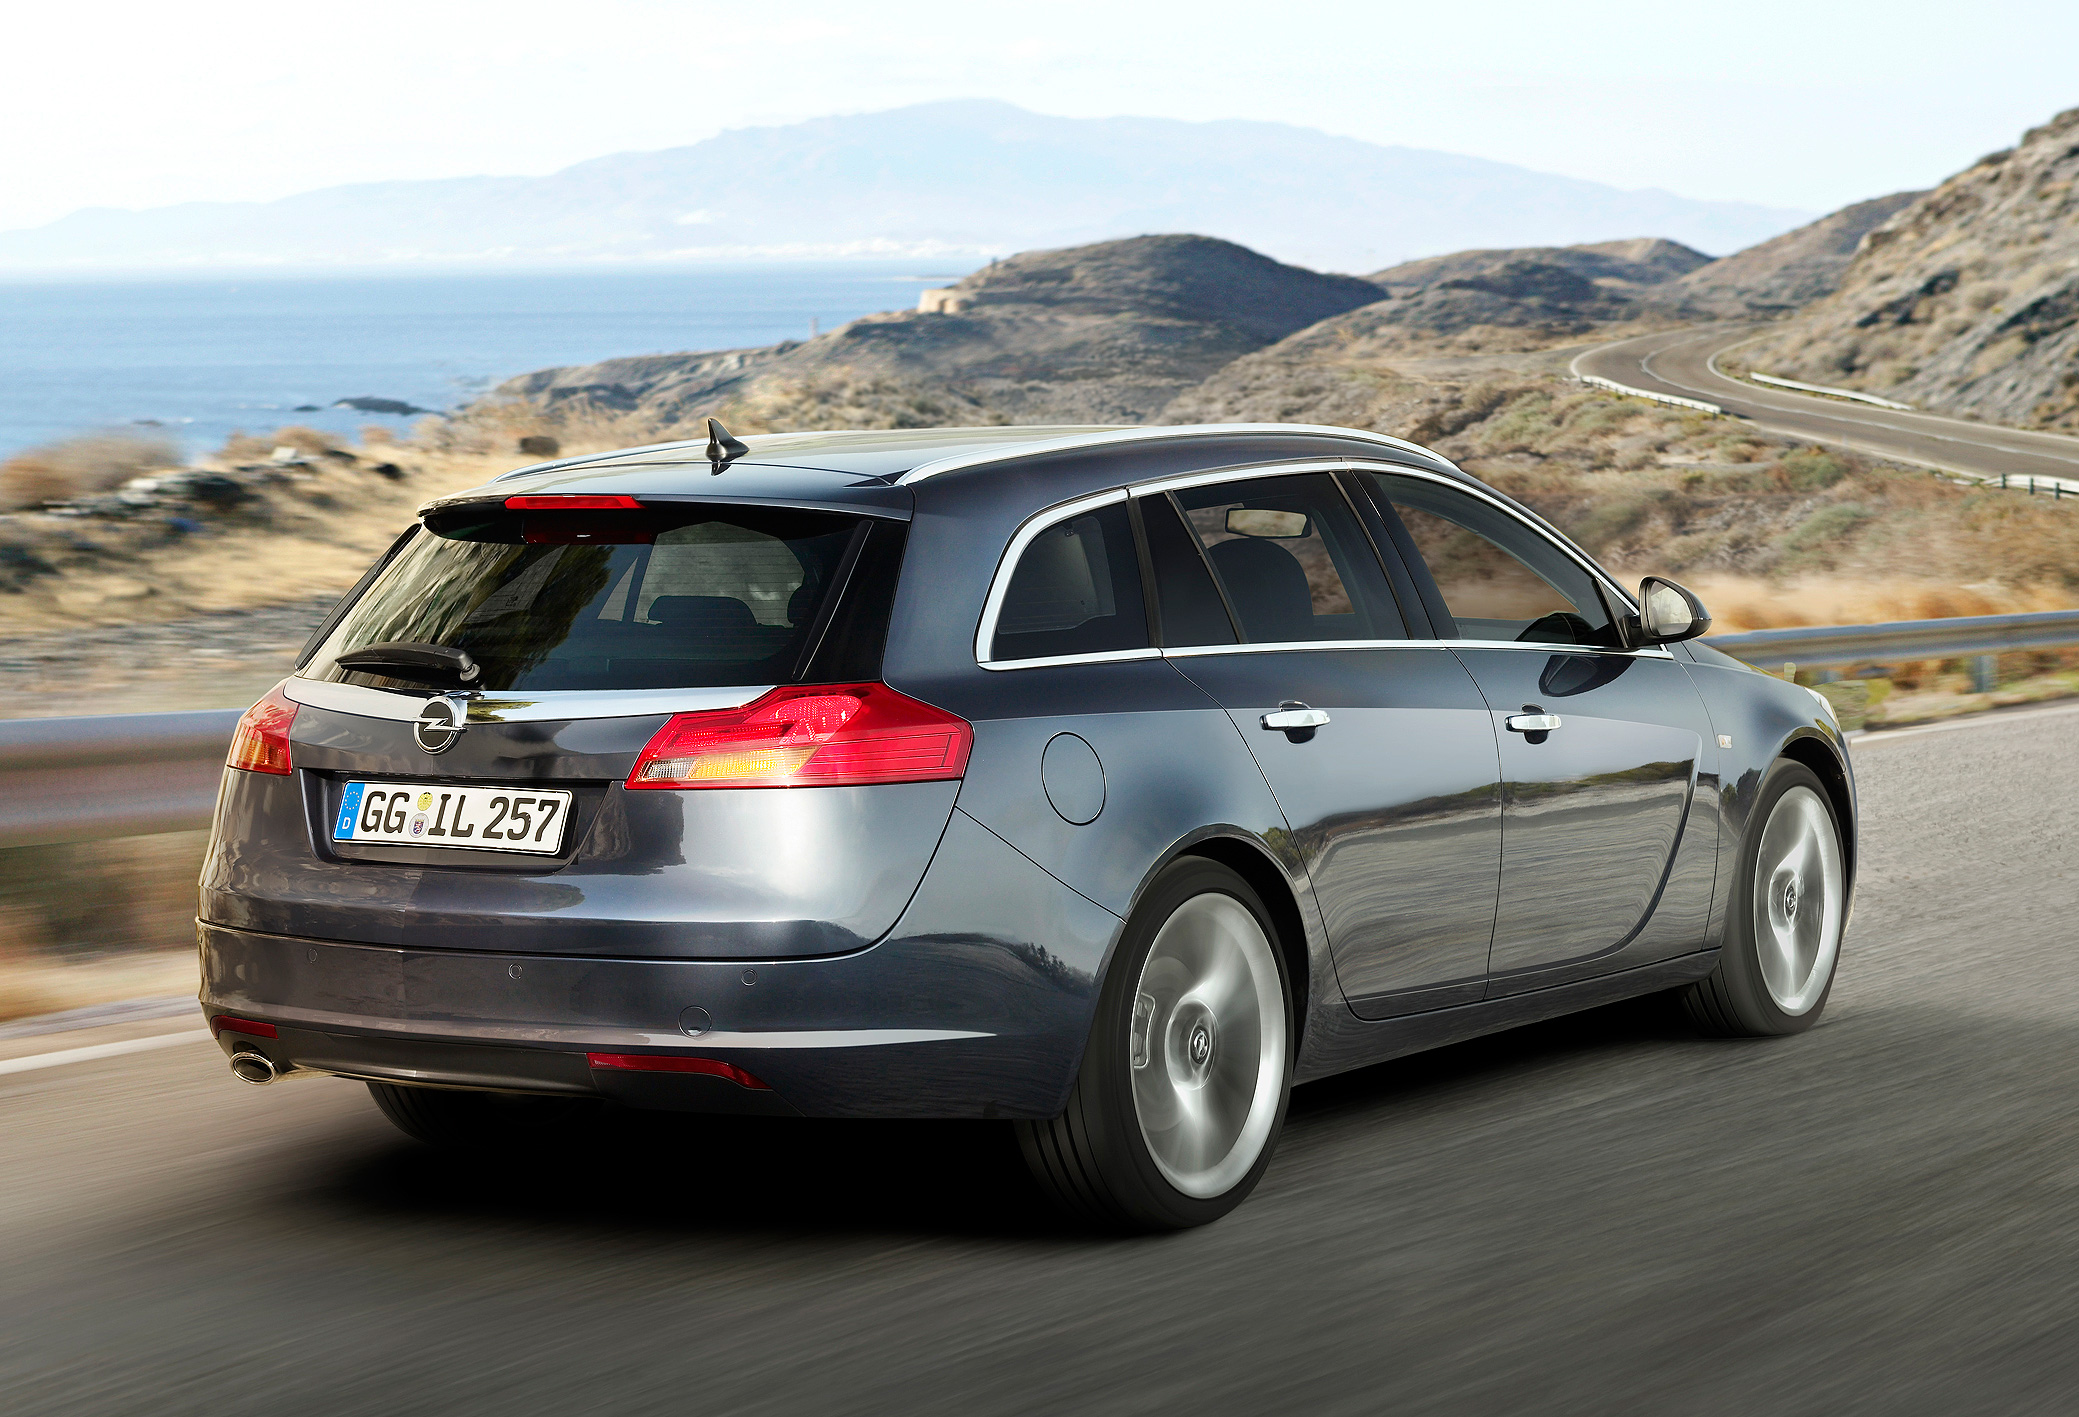 family car â€” called the Insignia Sports Tourer, the new Opel/Vauxhall